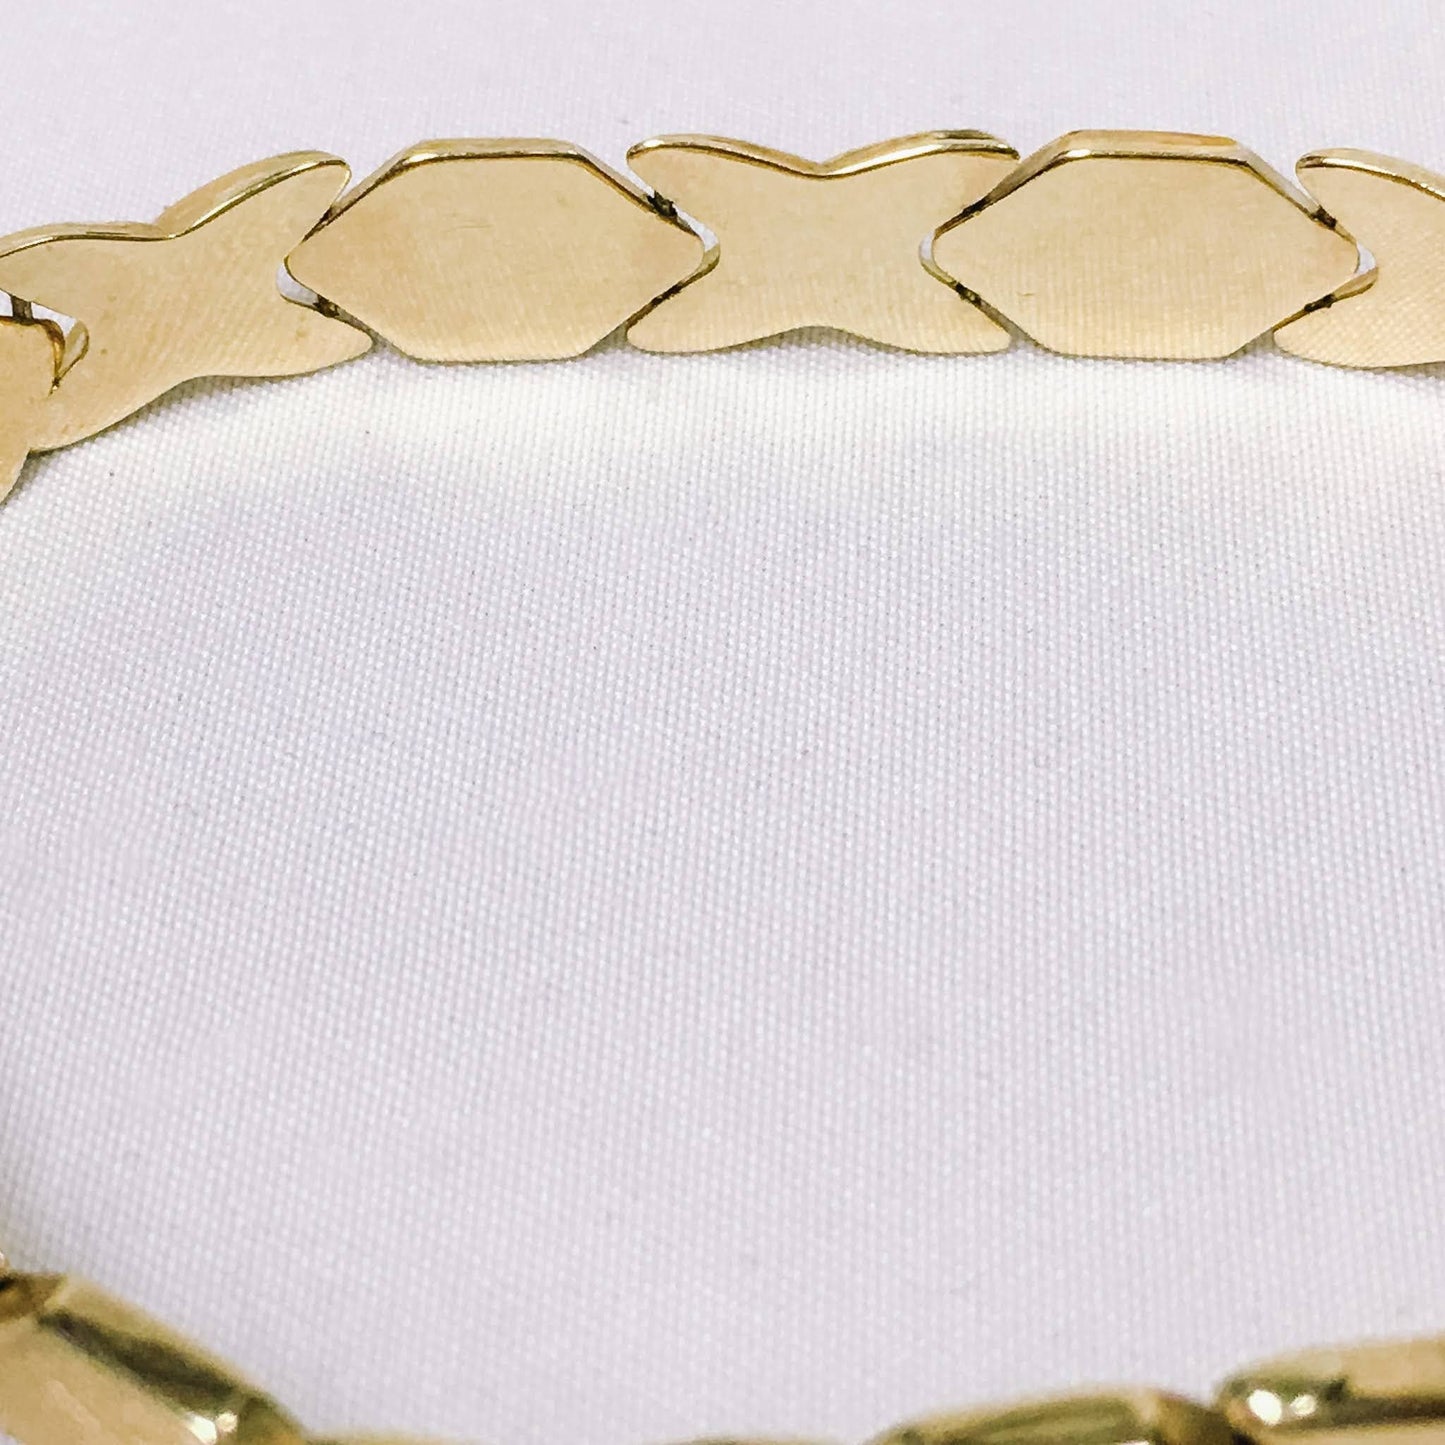 Vintage 14k Italy X and O Matte and Polished Hollow Bracelet, 8.92mm